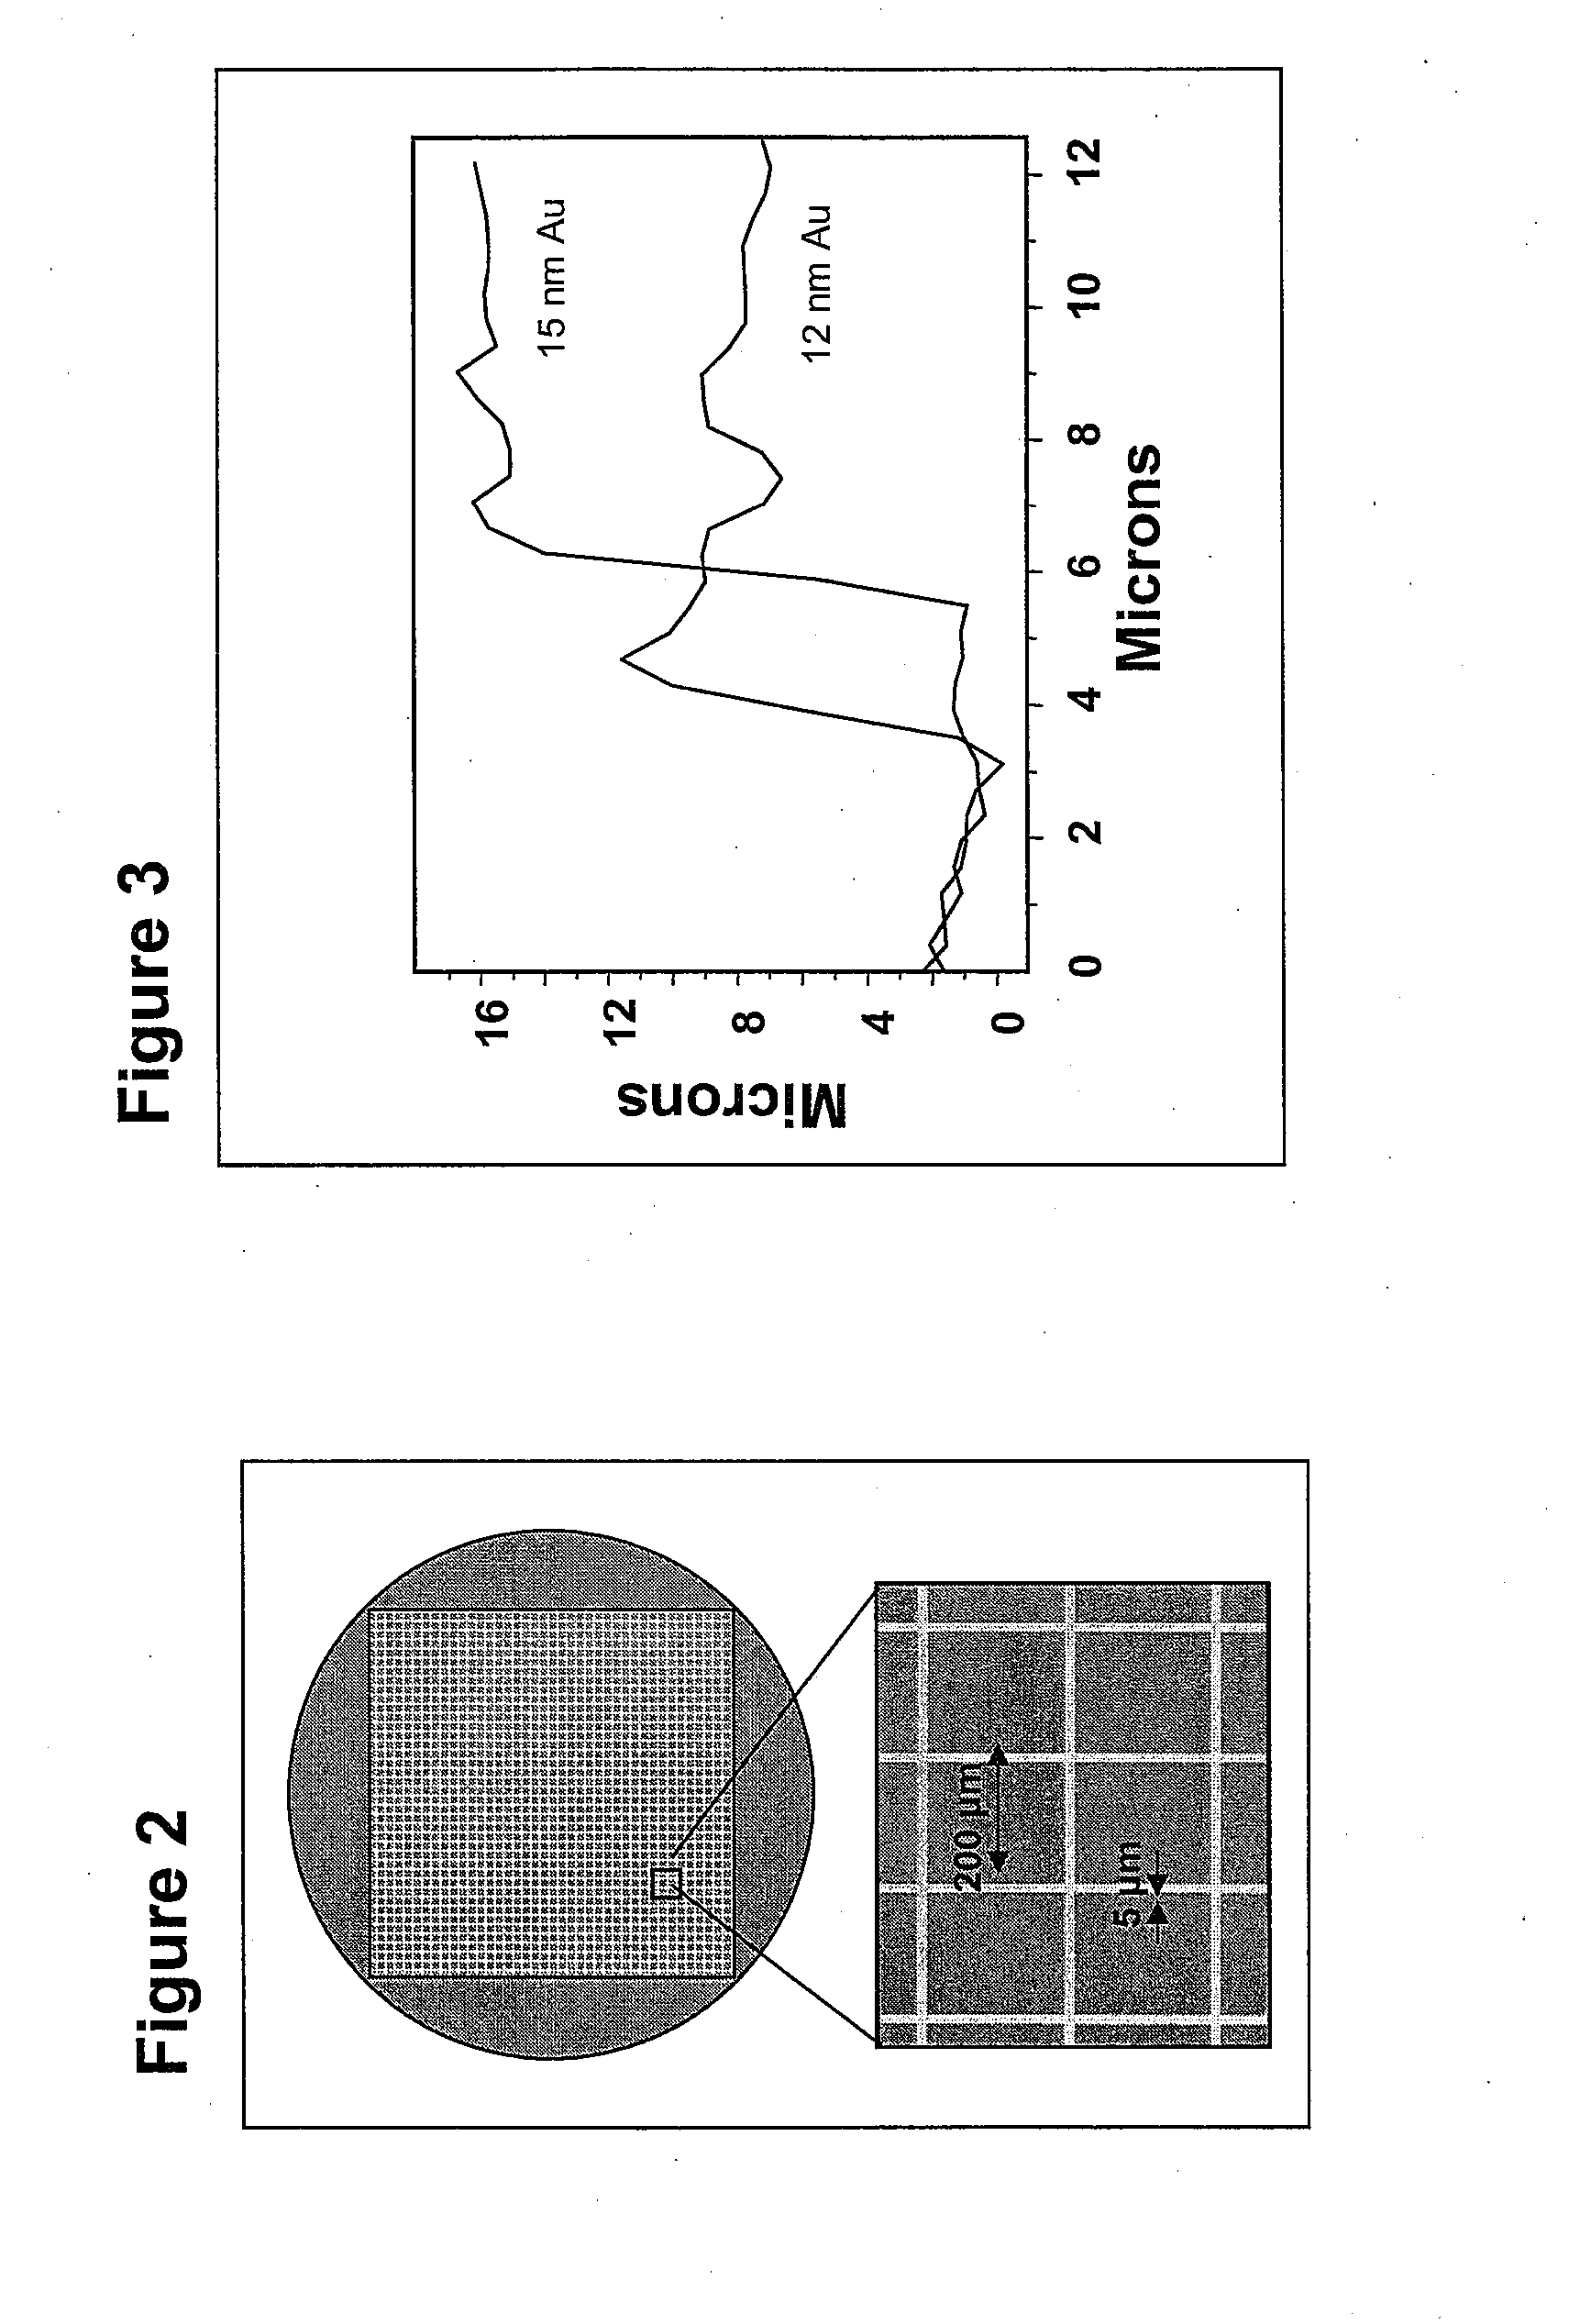 Fiducial Marker for Correlating Images